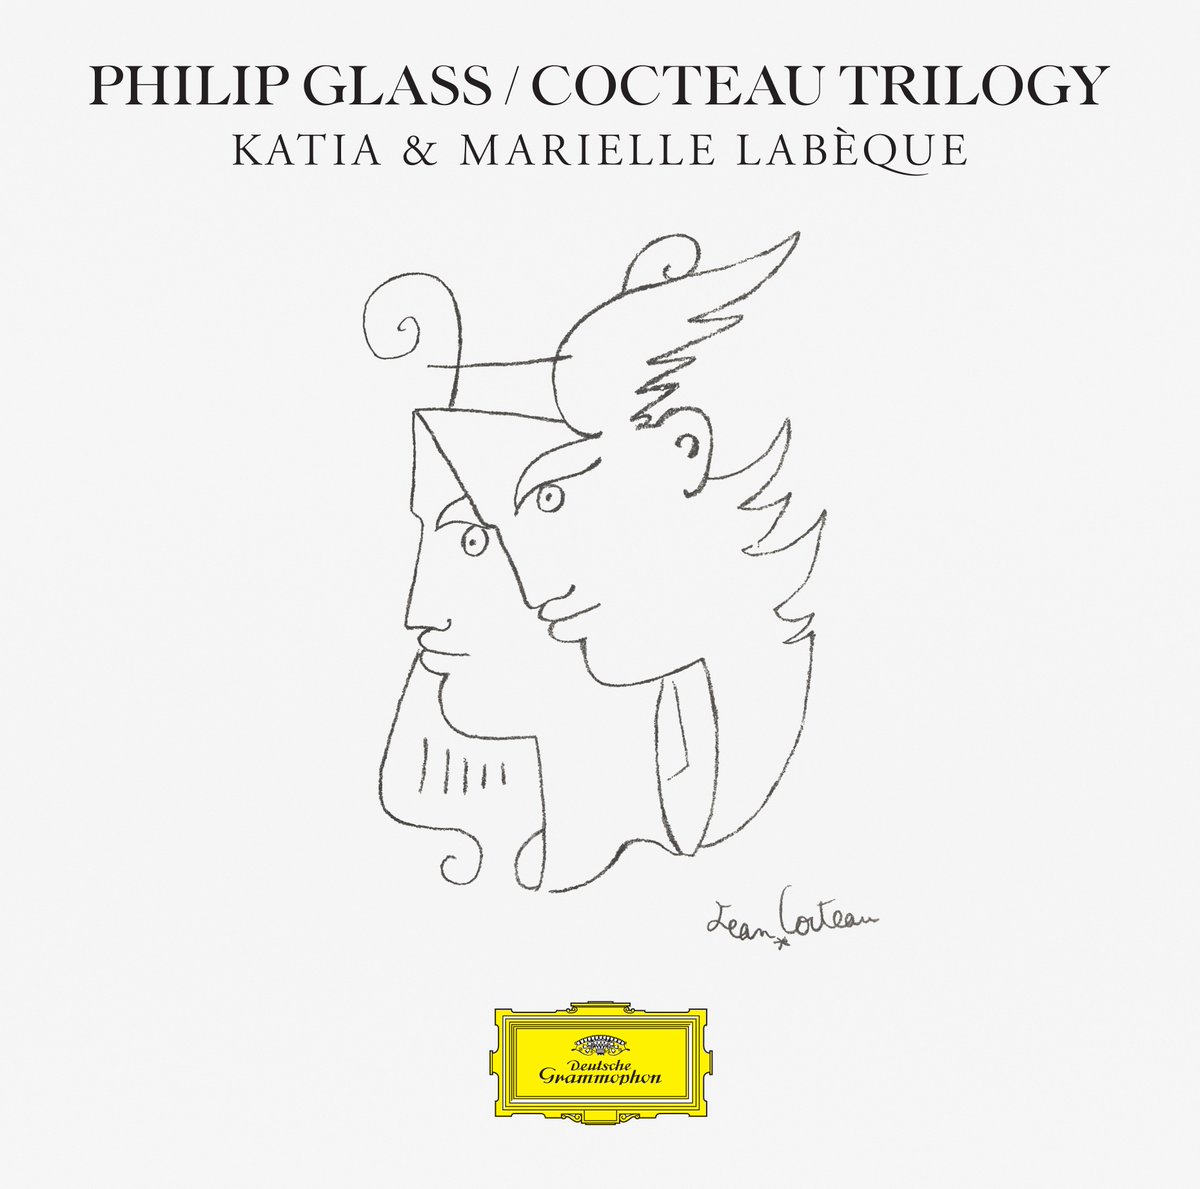 Katia and Marielle Labèque are happy to announce the upcoming release of their new album dedicated to the music of Philip Glass, completing the Cocteau Trilogy. Out on 23 February. Pre-Order: labeque.lnk.to/CocteauTrilogy #Labeque #Cocteau #PhilipGlass @DGclassics @philipglass